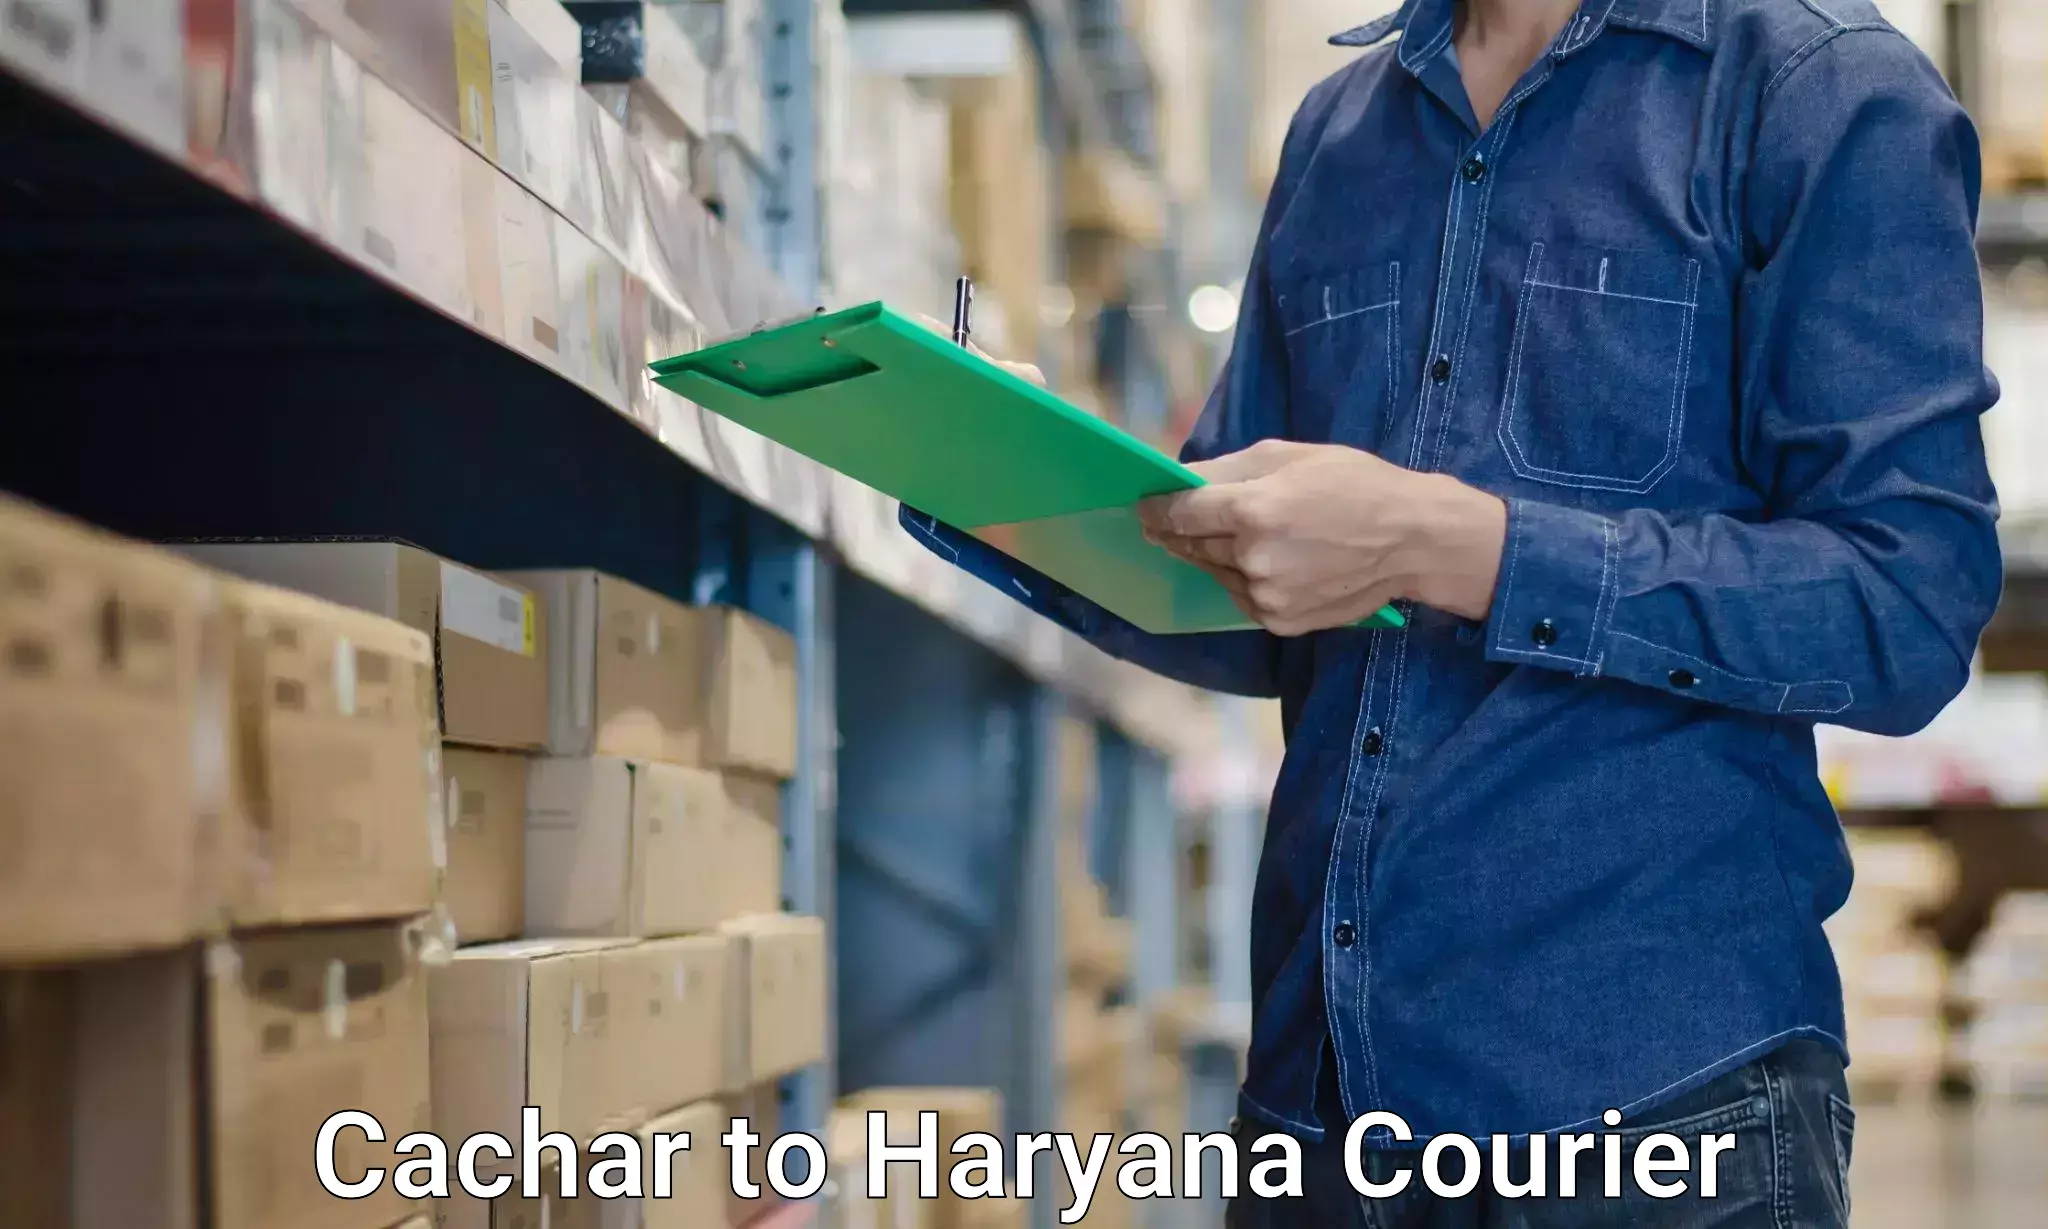 Furniture moving experts Cachar to Haryana